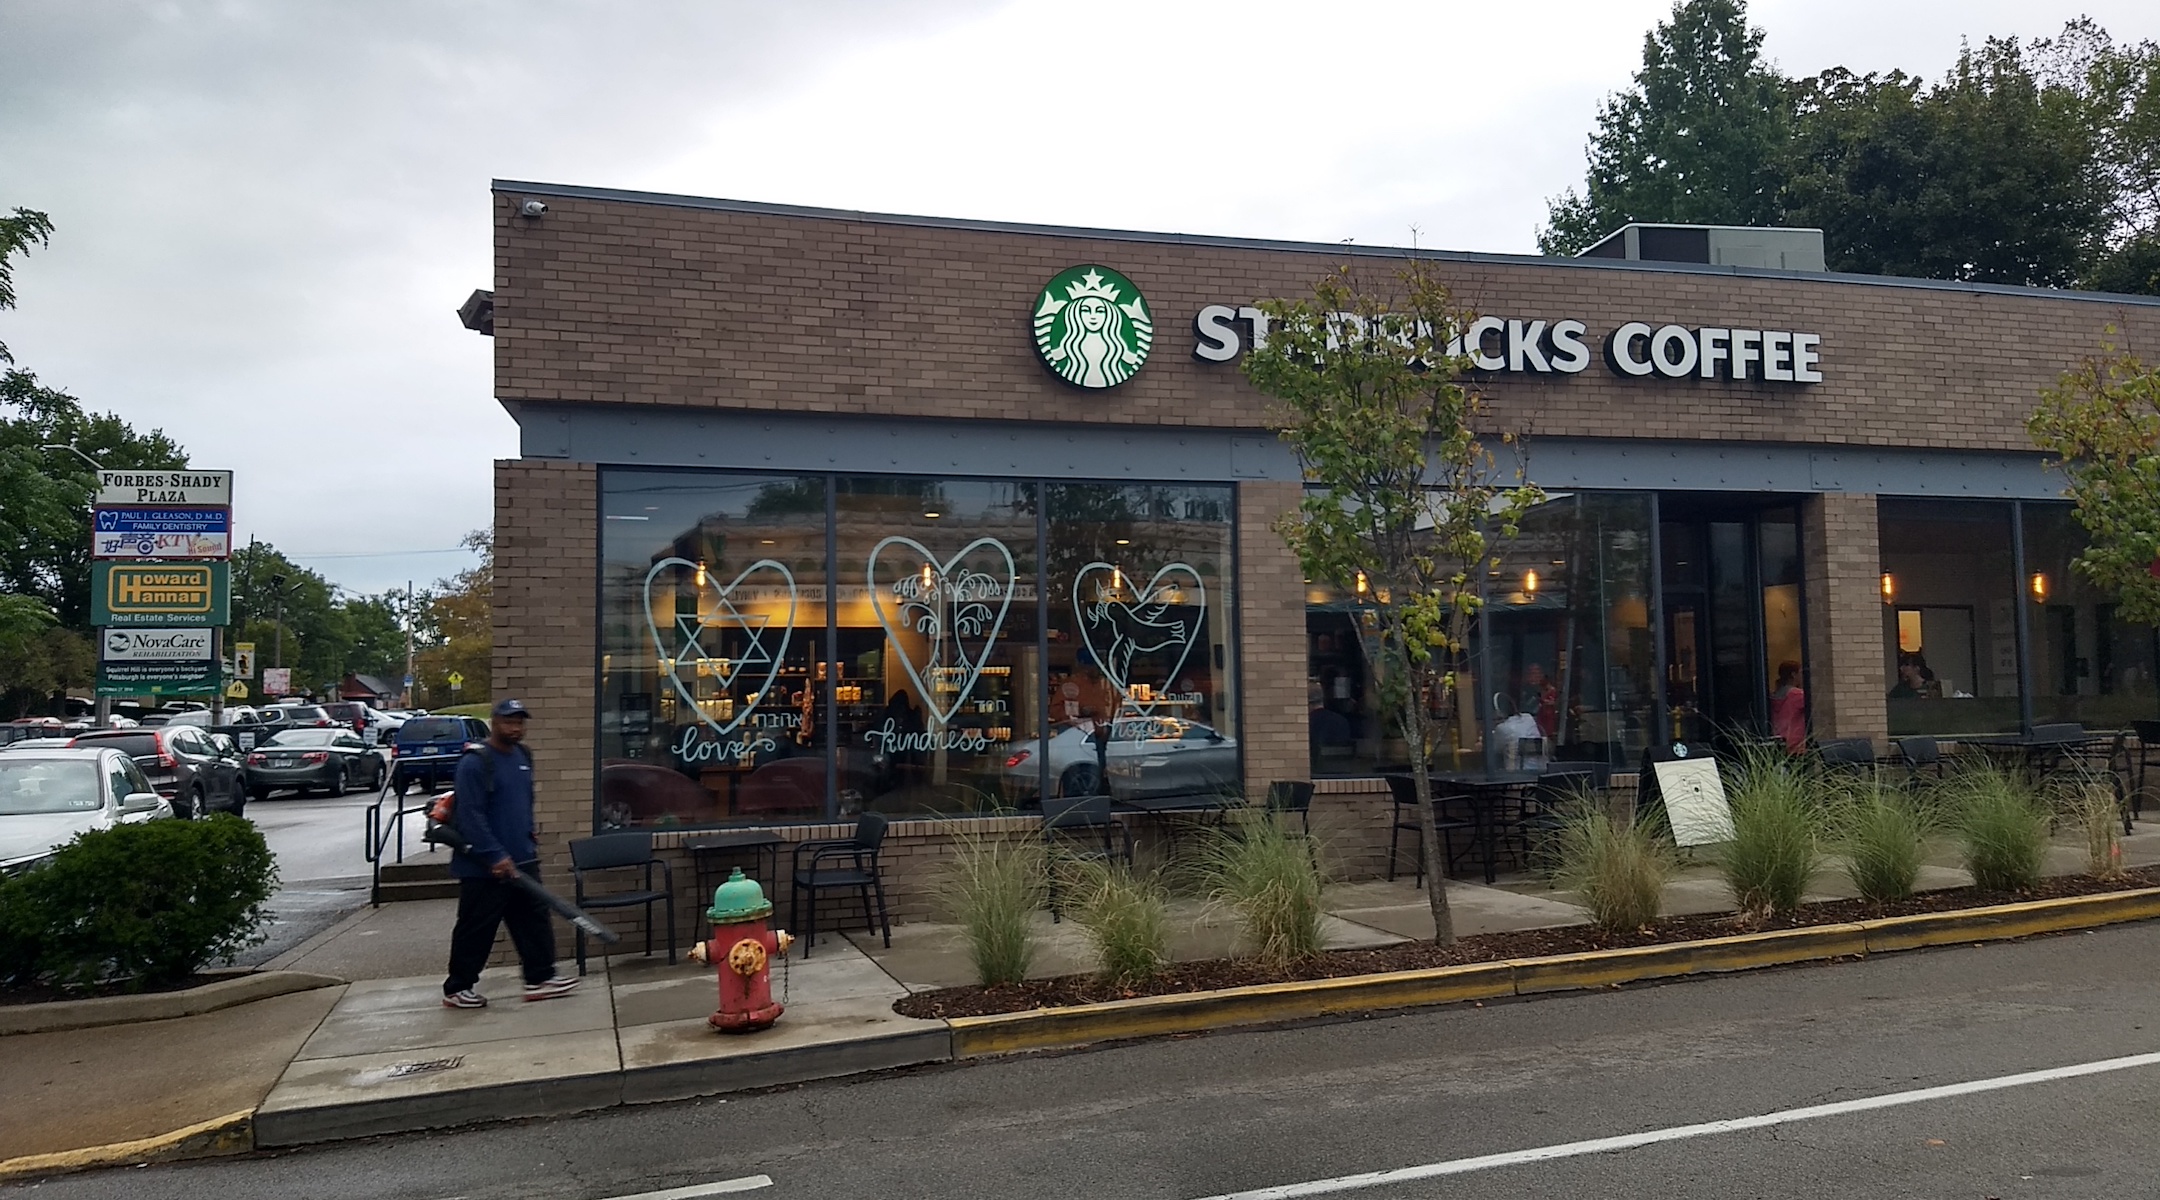 The window of the Starbucks in Squirrel Hill bears three hearts with the words "love," "kindness" and "hope" written in English and Hebrew. (Ben Sales)